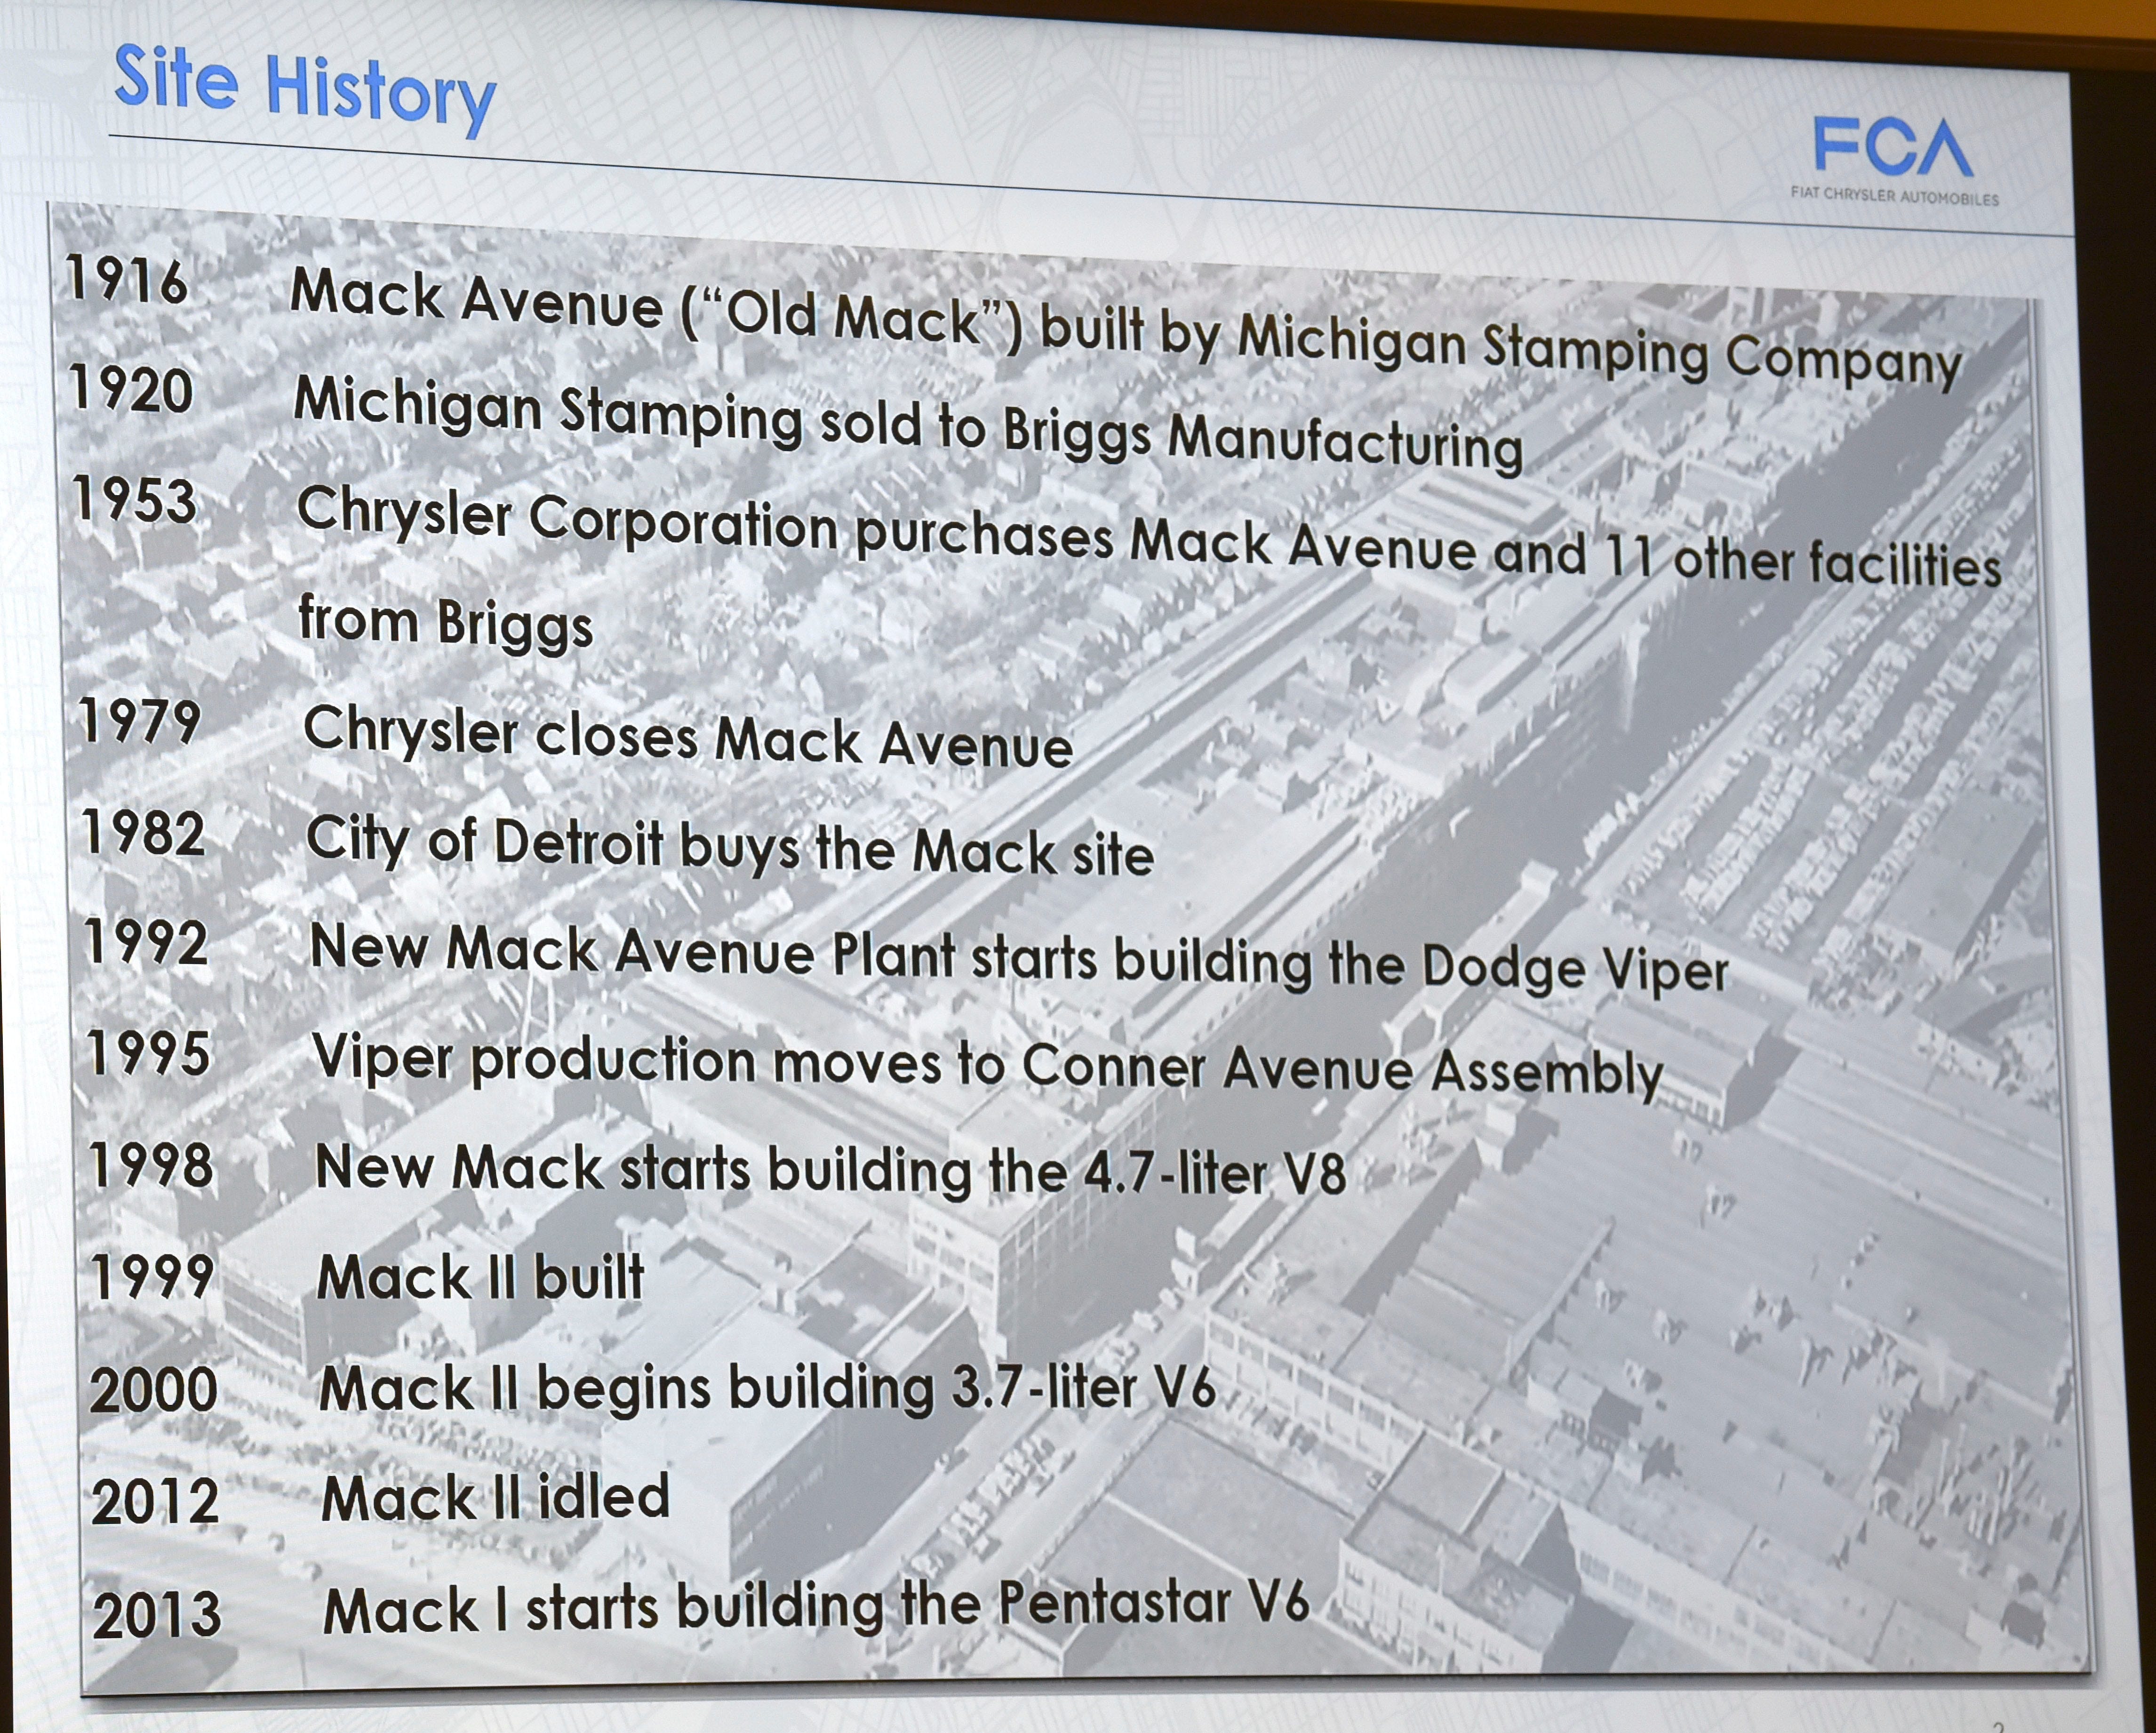 This is a site history timeline from 1916 to 2013.